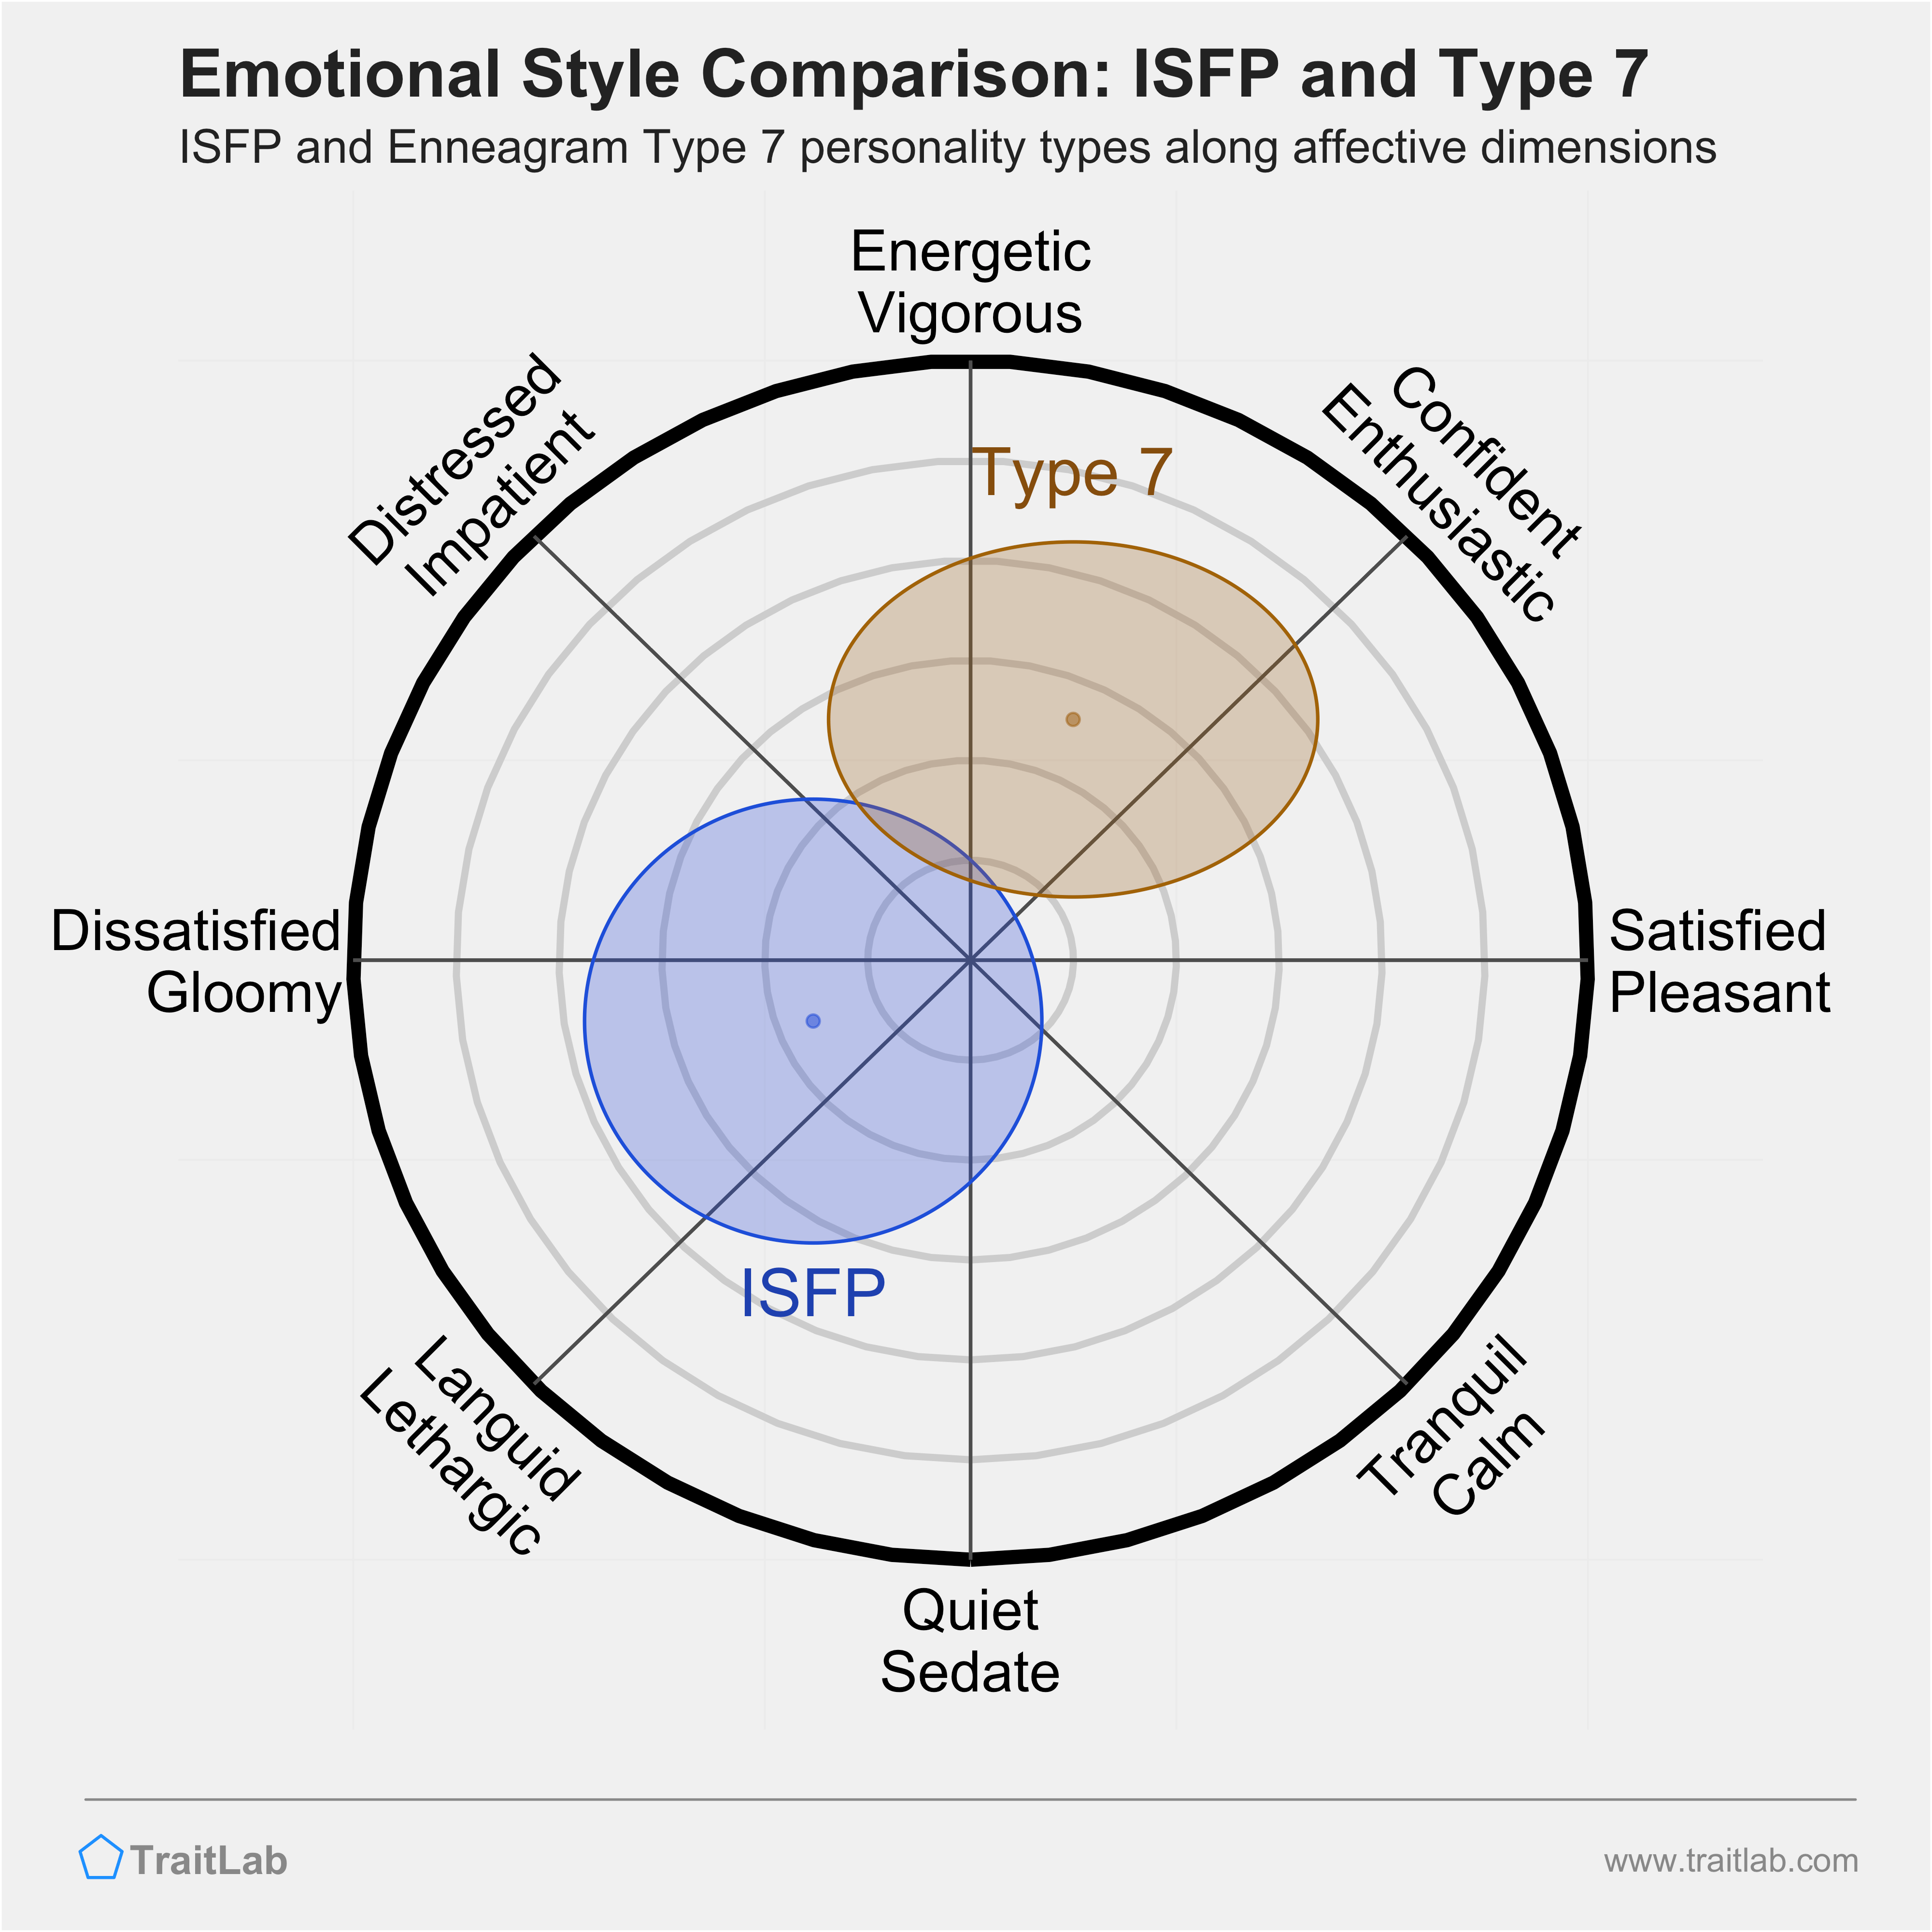 ISFP and Type 7 comparison across emotional (affective) dimensions